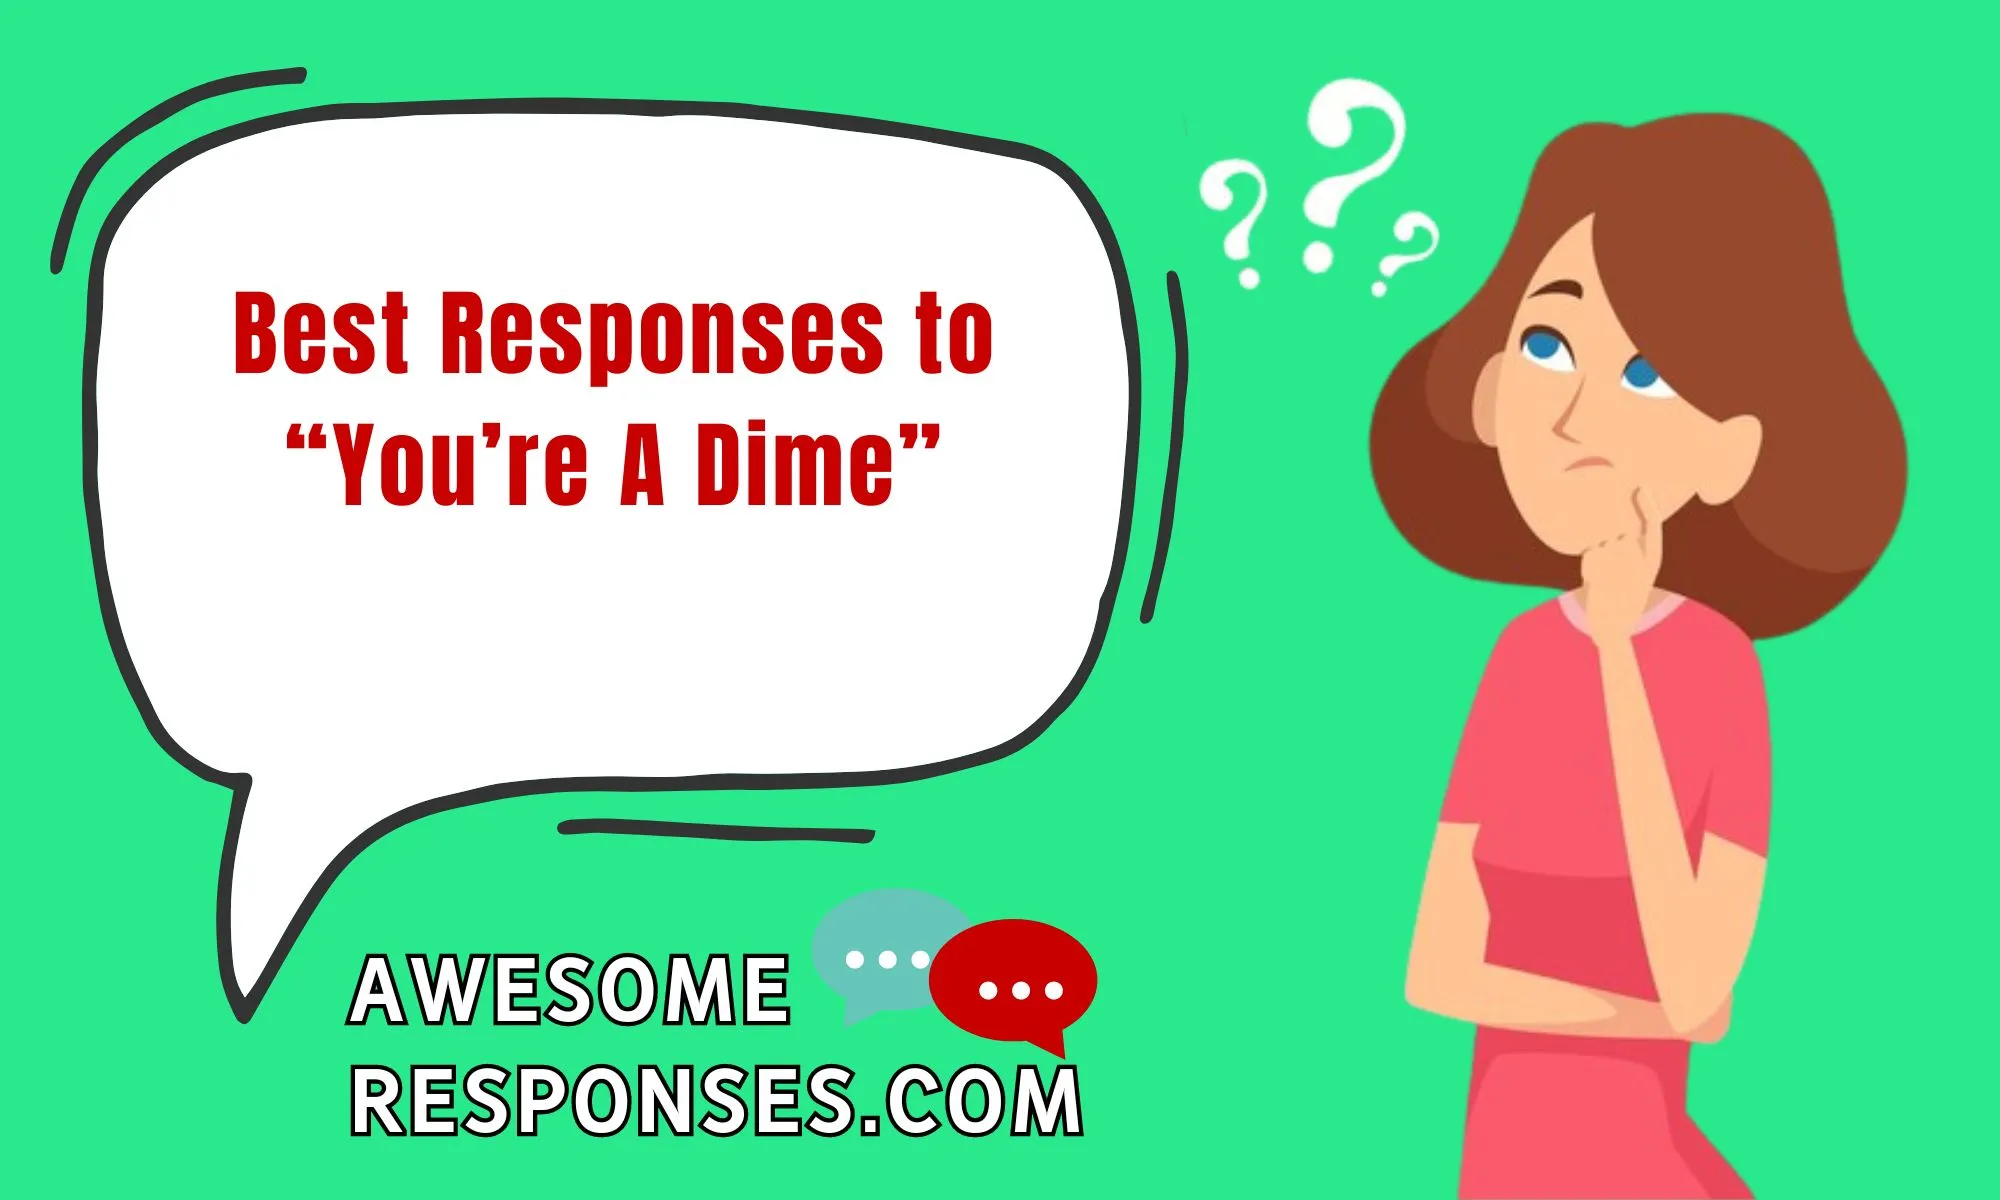 Best Responses to “You’re A Dime”